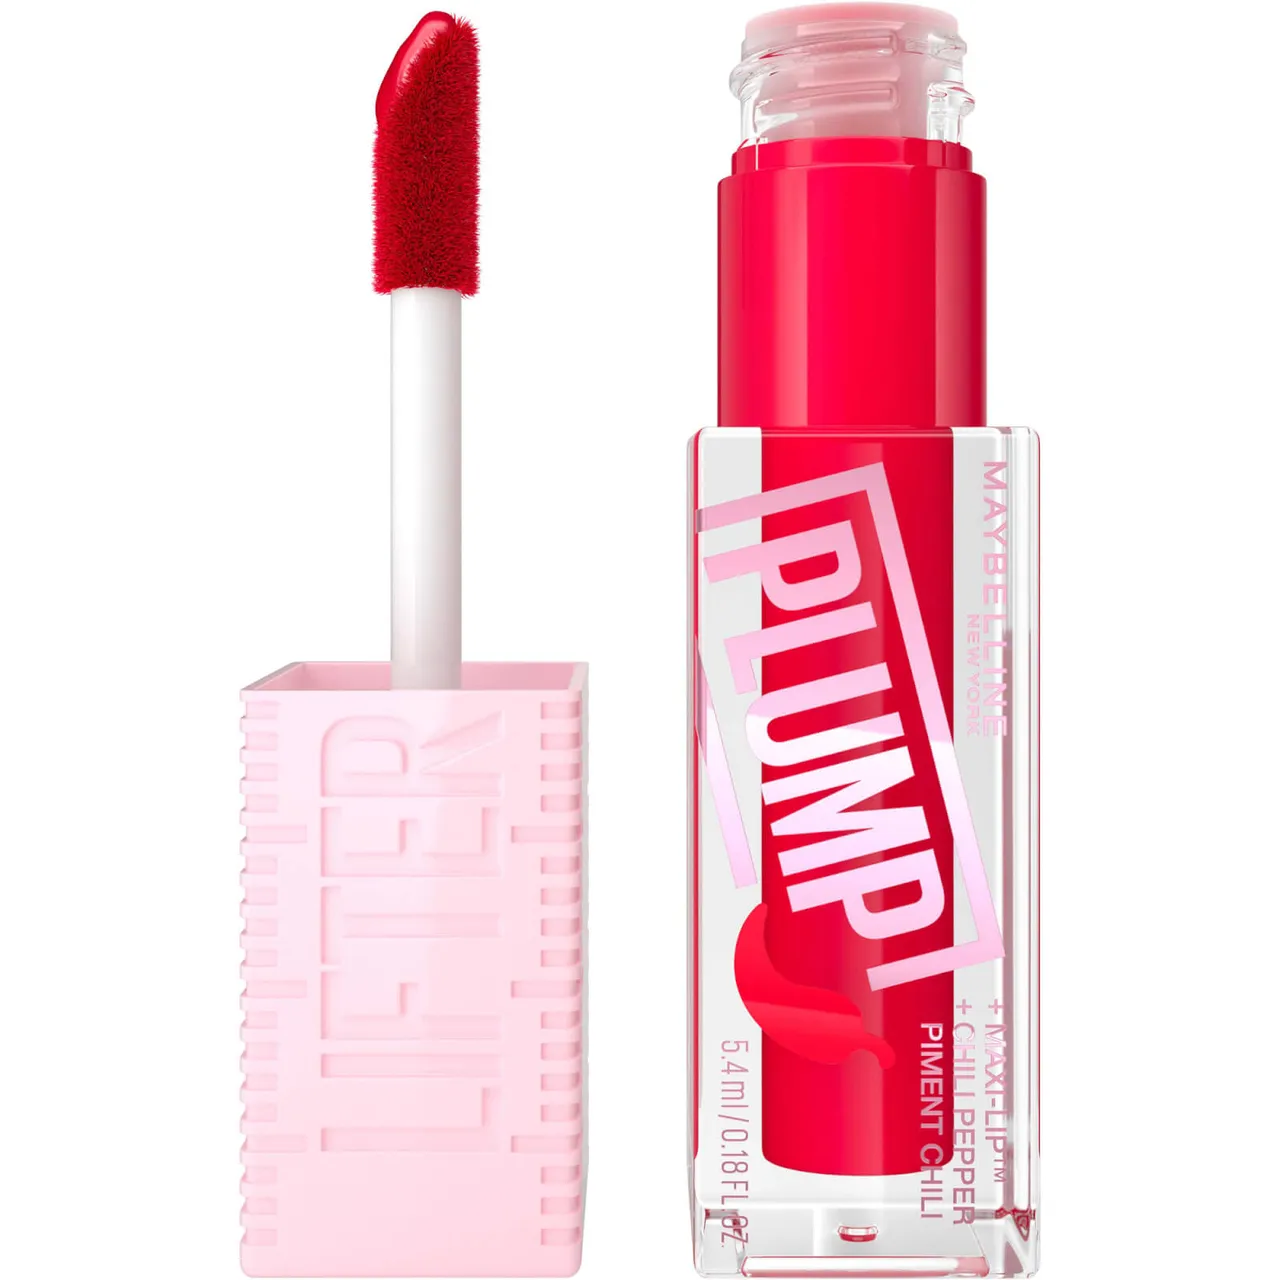 Maybelline Lifter Gloss Plumping Lip Gloss Lasting Hydration Formula With Hyaluronic Acid and Chilli Pepper (Various Shades) - Red Flag